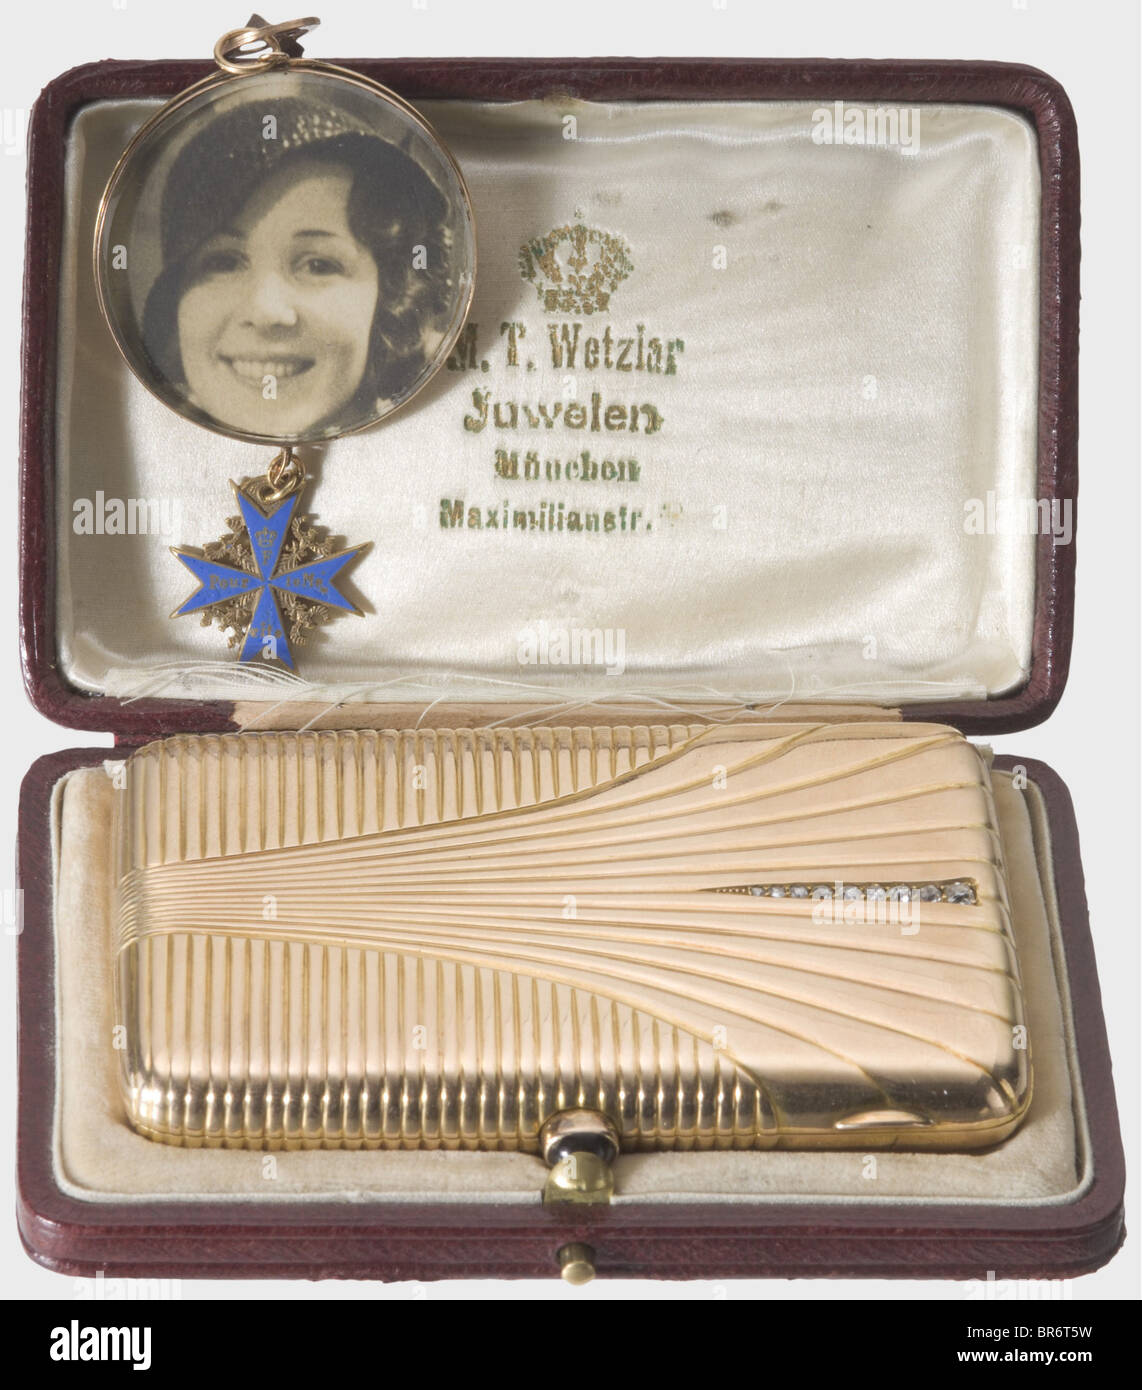 Ernst Udet (1896 - 1941) - a golden cigarette case and a photograph charm with a Pour le mérite-miniature, of his girlfriend Eleanor 'Lo' Zink as gifts for his 22nd birthday and for the Pour le mérite conferment in 1918. A case from the Jugendstil epoch from jeweller M. P. Wetzlar in Munich with corrugated surfaces and nine diamonds set on the lid. Engraved inscription inside 'Meinem kleinen Helden und Pour historic, historical, people, 1910s, 20th century, troop, troops, armed forces, military, militaria, army, wing, group, air force, air forces, object, objec, Stock Photo